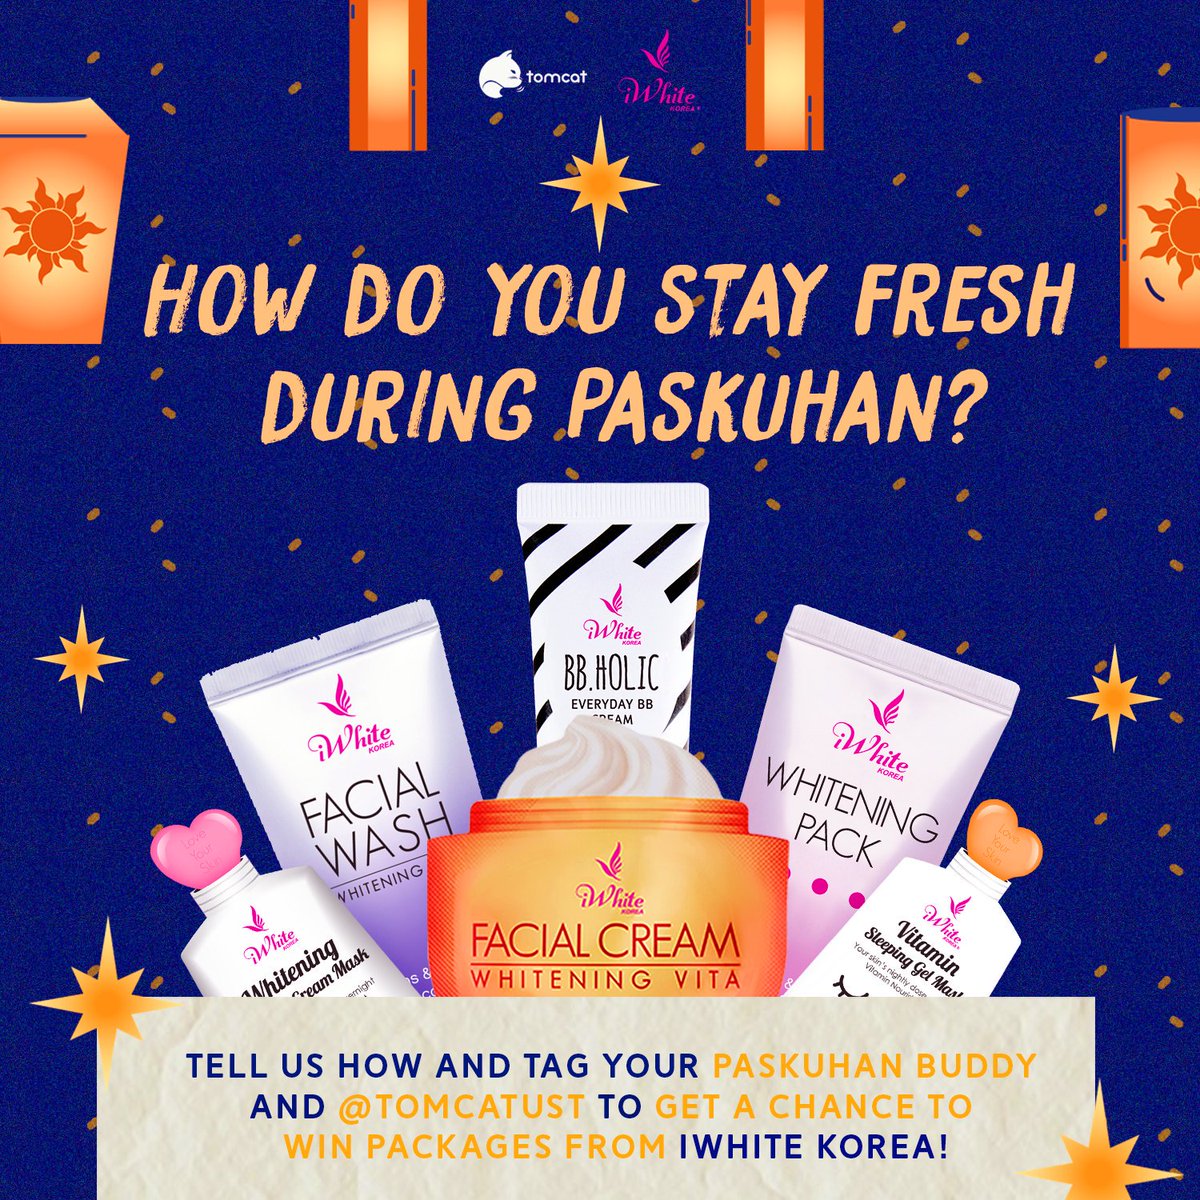 Tell us why you should receive a special gift from iWhite Korea this Paskuhan season and get a chance to win and your Paskuhan buddy by simply tagging them in your tweet! 

#iWhiteKoreaXPaskuhan2018 #iWhiteKoreaXTOMCAT